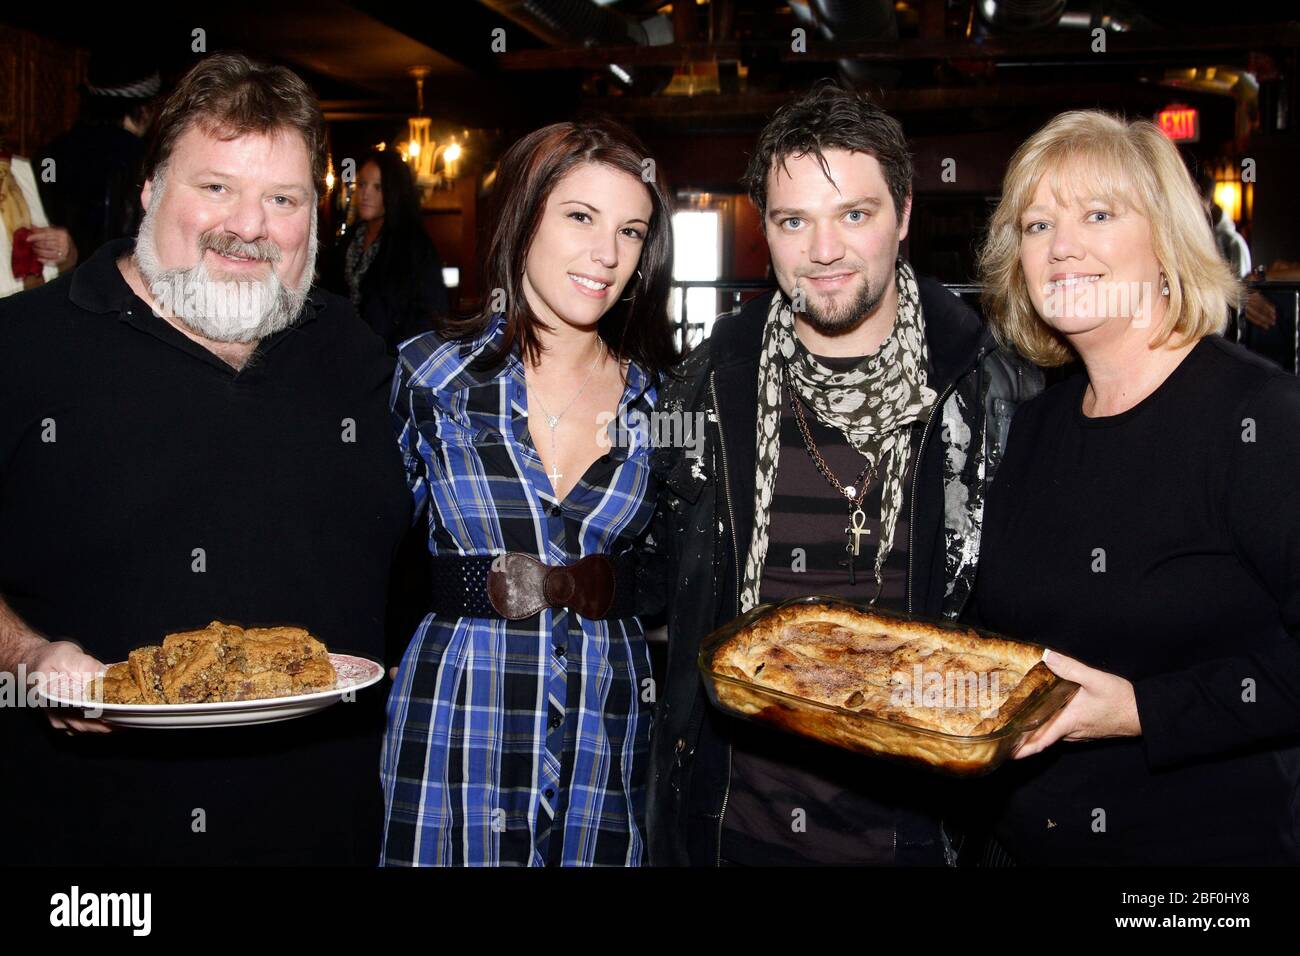 Bam Margera pictured with his wife, Missy and his mom and dad, April and Phil, with homemade deserts at The Note, Bam's new club in West Chester, PA on November 18, 2008. Credit: Scott Weiner/MediaPunch Stock Photo